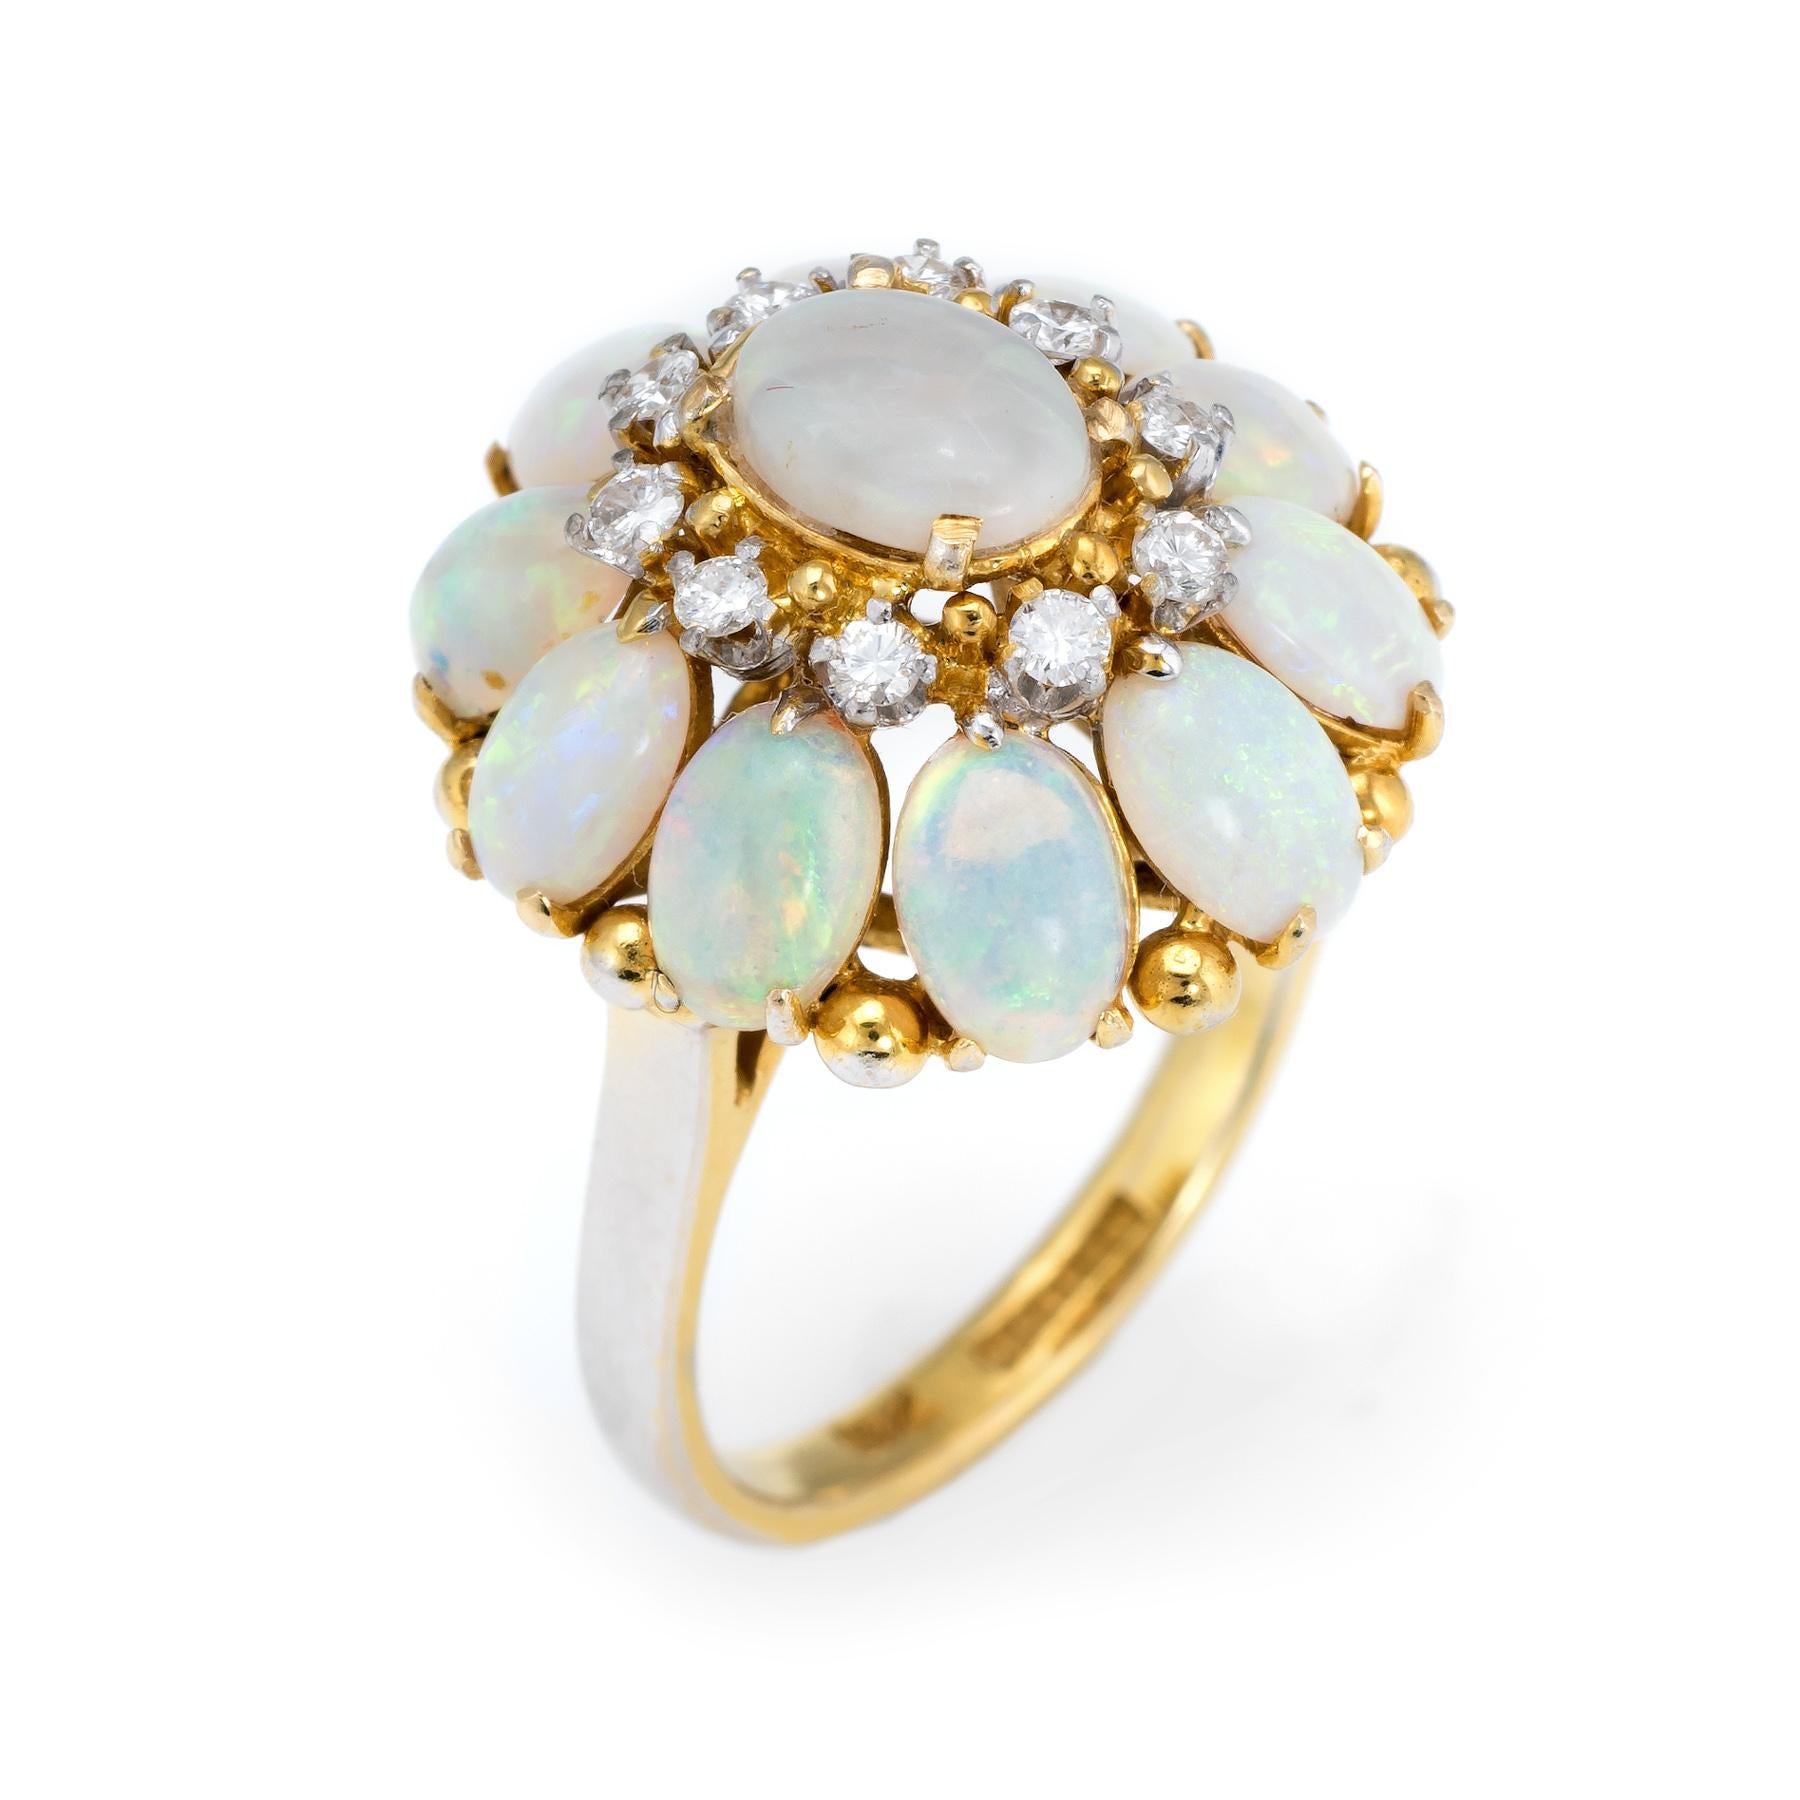 Finely detailed vintage H Stern opal & diamond cocktail ring (circa 1960s to 1970s), crafted in 18 karat yellow gold. 

10 natural opals measure 6mm x 4mm (estimated at 0.50 carats each). the center set opal measures 7mm x 5mm (estimated at 0.75